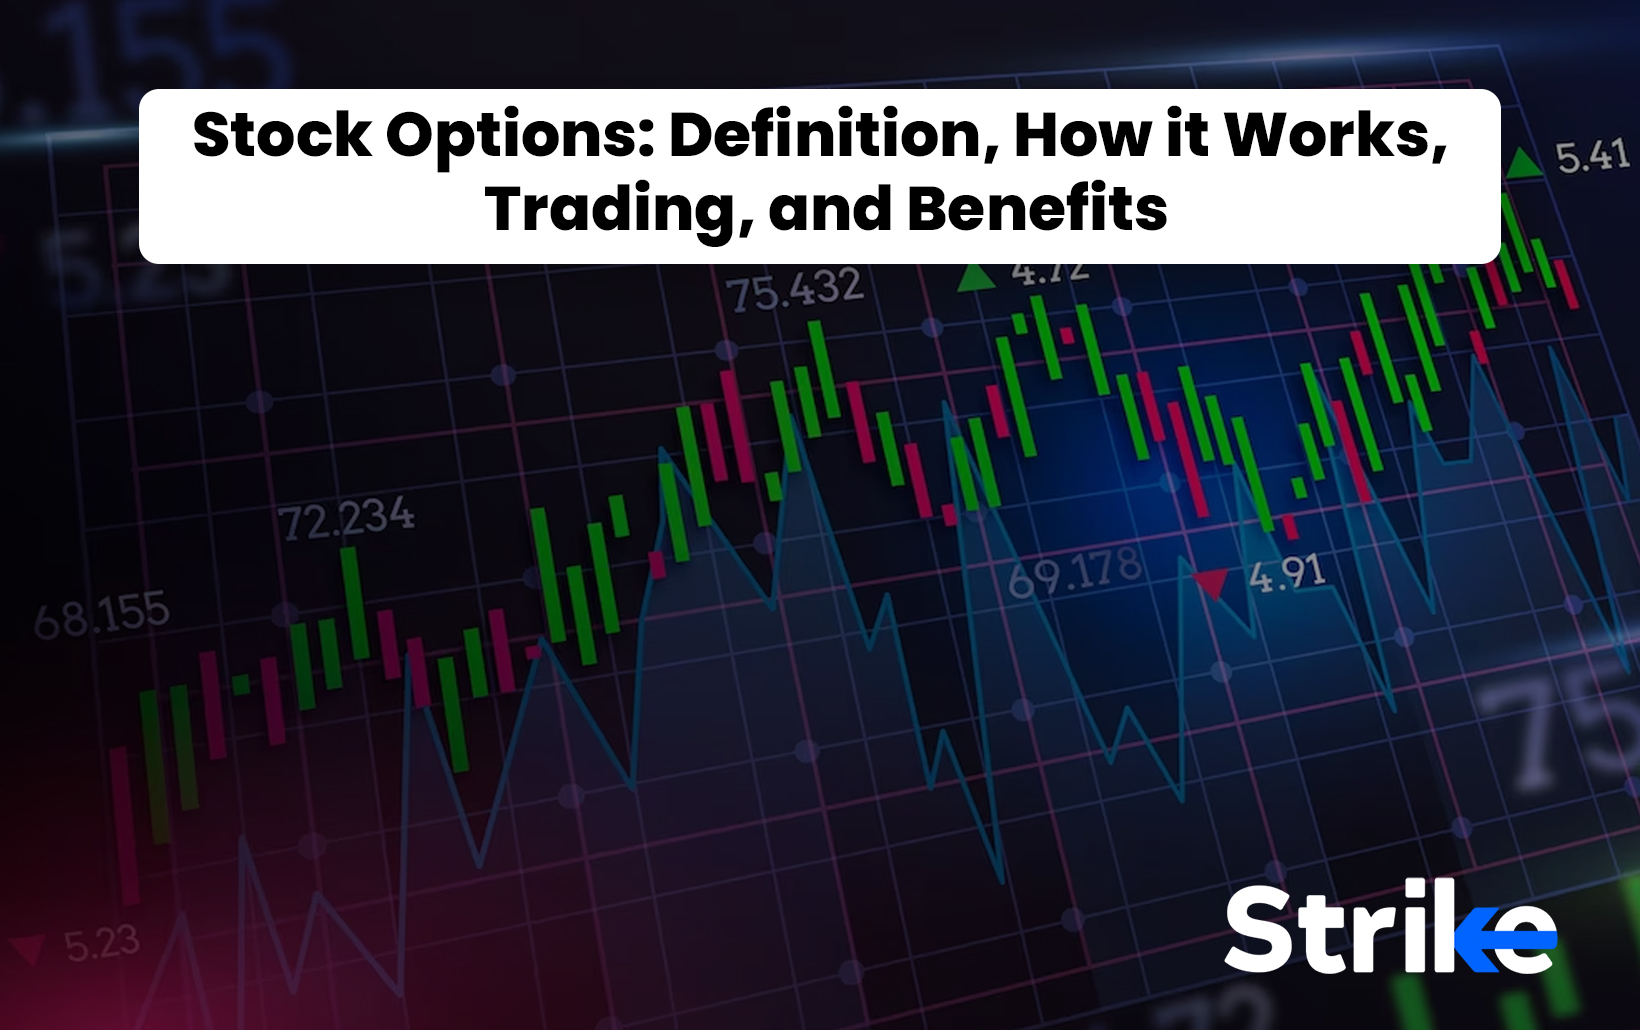 Stock Options: Definition, How it Works, Trading, and Benefits